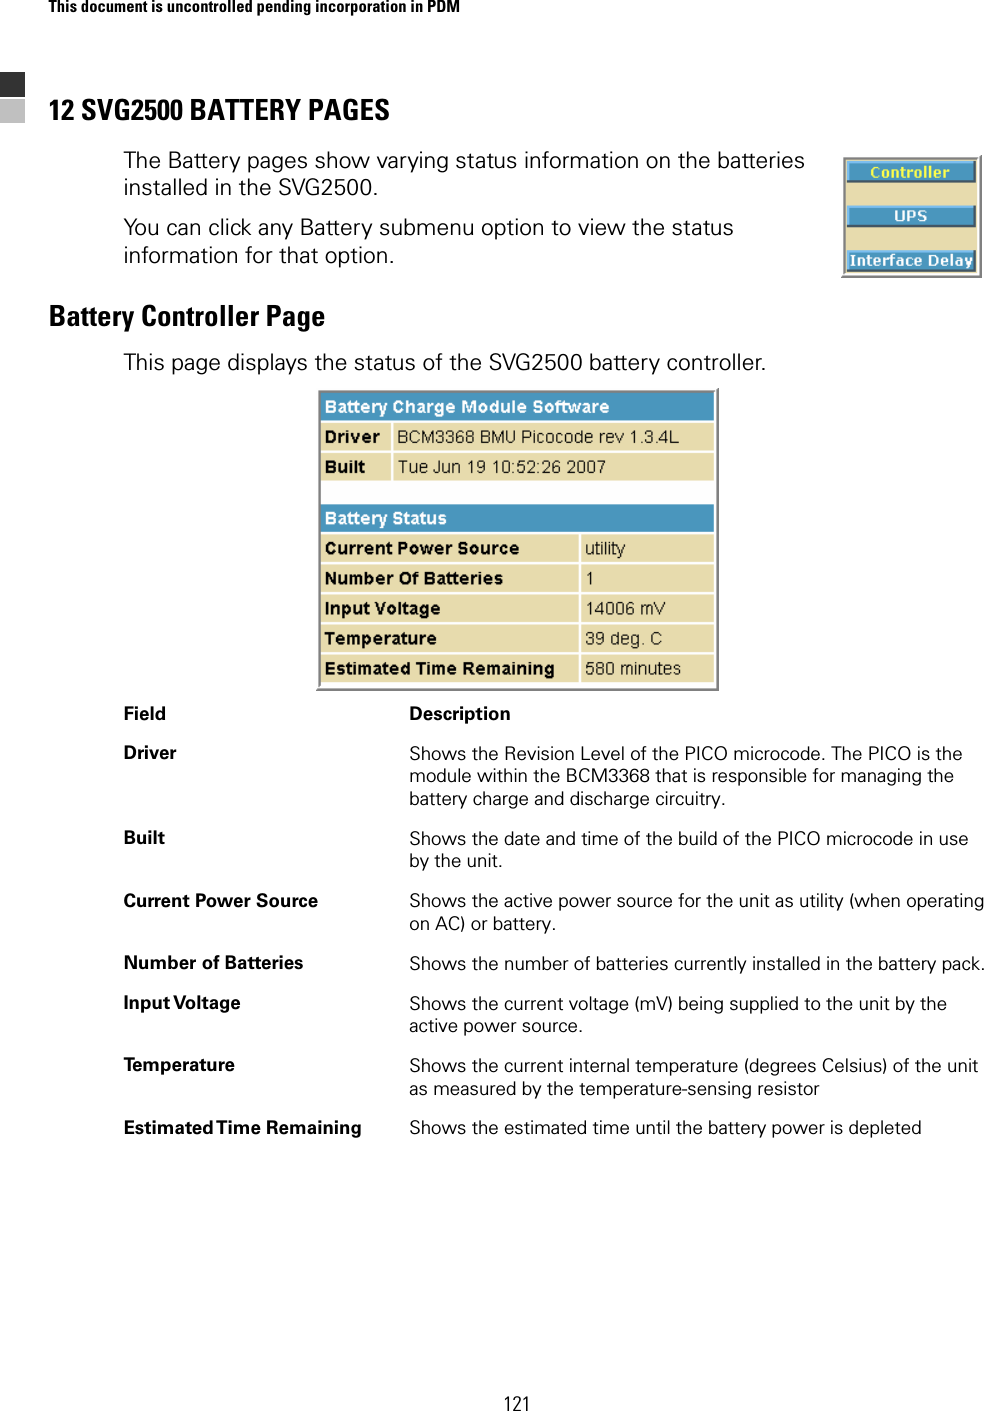 This document is uncontrolled pending incorporation in PDM  121 12 SVG2500 BATTERY PAGES The Battery pages show varying status information on the batteries installed in the SVG2500. You can click any Battery submenu option to view the status information for that option. Battery Controller Page This page displays the status of the SVG2500 battery controller.  Field Description Driver  Shows the Revision Level of the PICO microcode. The PICO is the module within the BCM3368 that is responsible for managing the battery charge and discharge circuitry. Built  Shows the date and time of the build of the PICO microcode in use by the unit. Current Power Source  Shows the active power source for the unit as utility (when operating on AC) or battery. Number of Batteries  Shows the number of batteries currently installed in the battery pack. Input Voltage  Shows the current voltage (mV) being supplied to the unit by the active power source. Temperature  Shows the current internal temperature (degrees Celsius) of the unit as measured by the temperature-sensing resistor Estimated Time  Remaining  Shows the estimated time until the battery power is depleted  